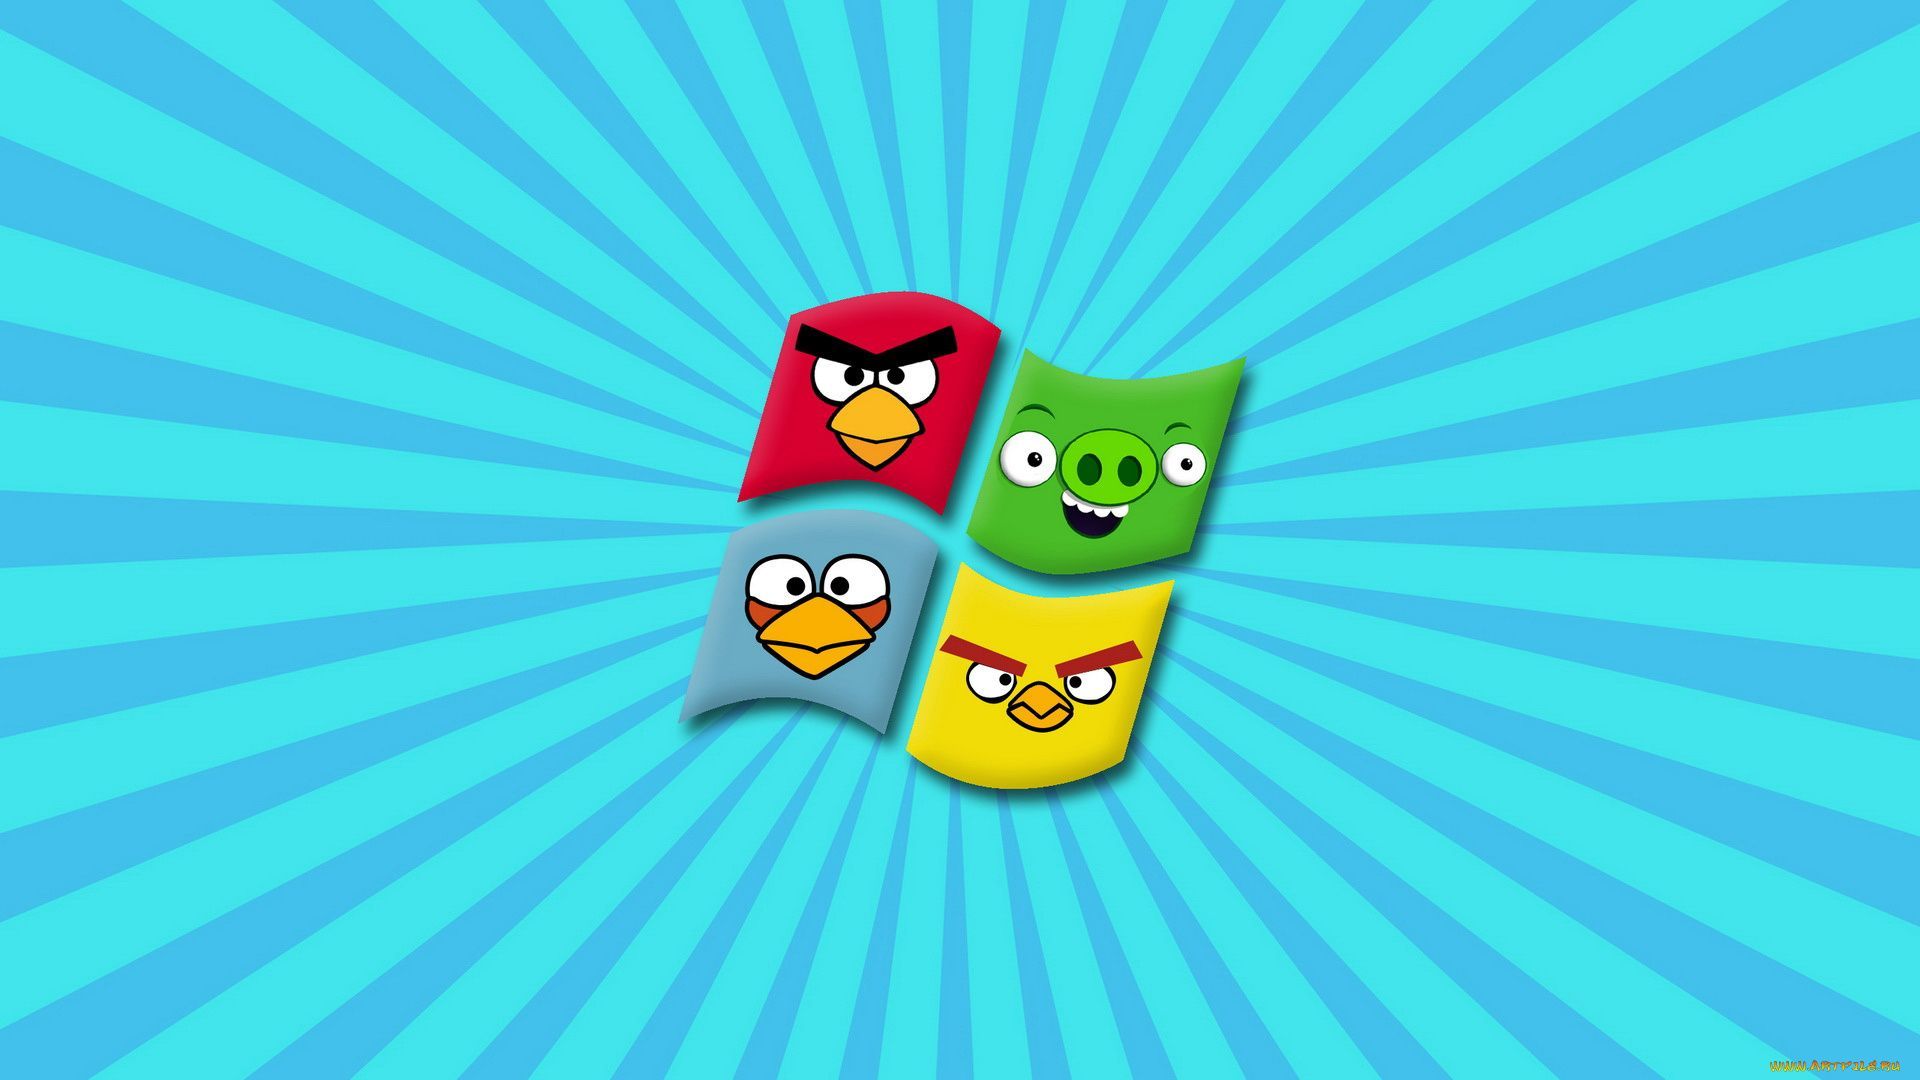 angry birds go wallpaper